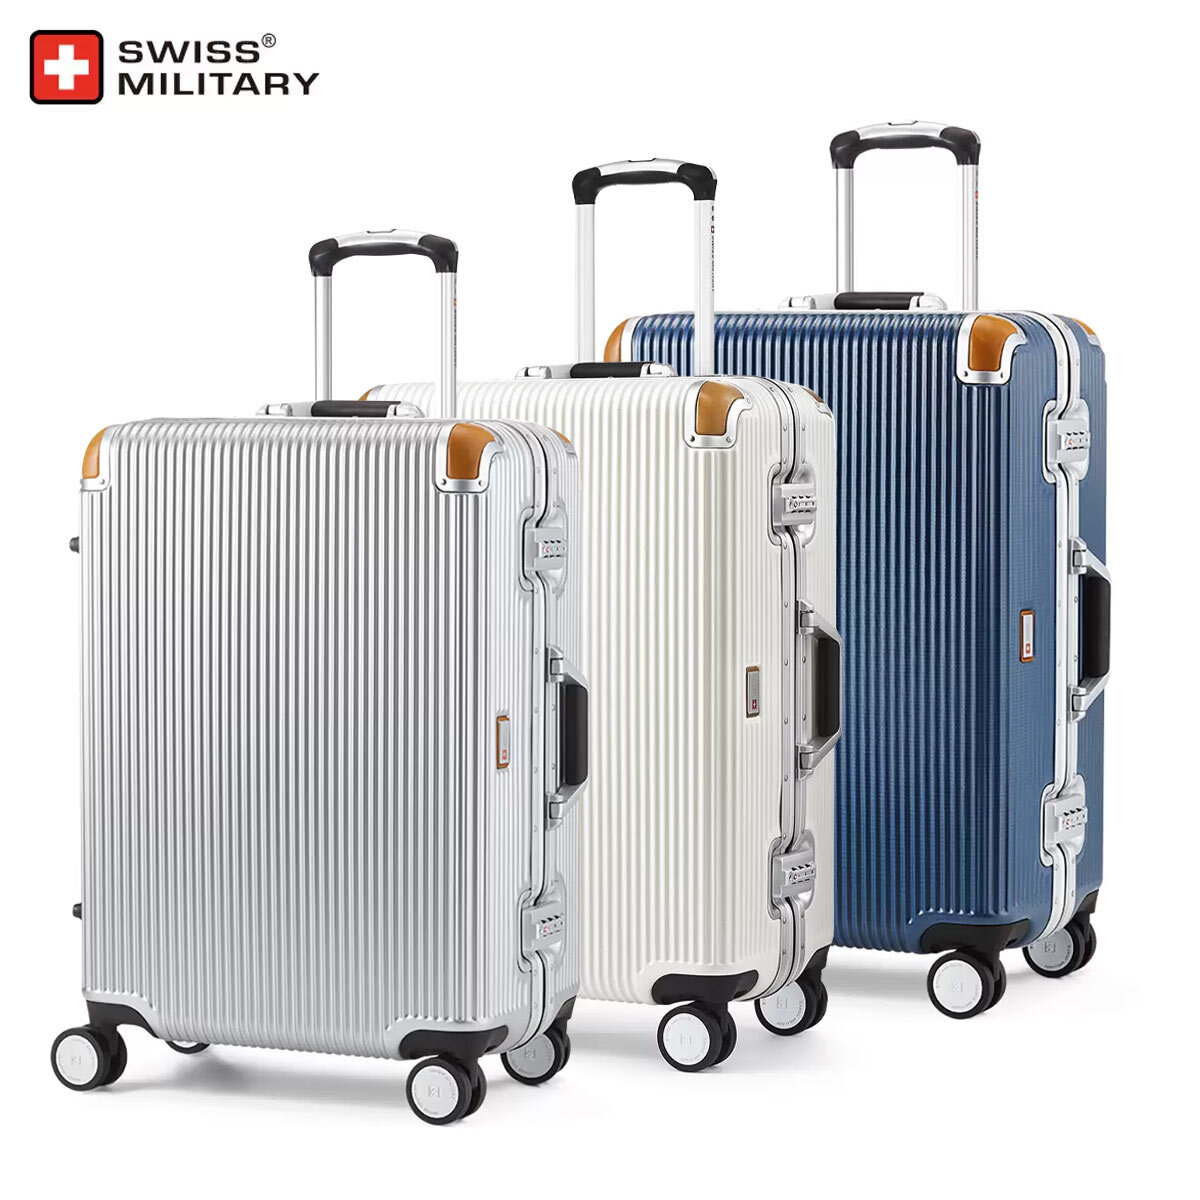 Swiss Military 65cm Large Hardside Case in 3 Colours | Co...